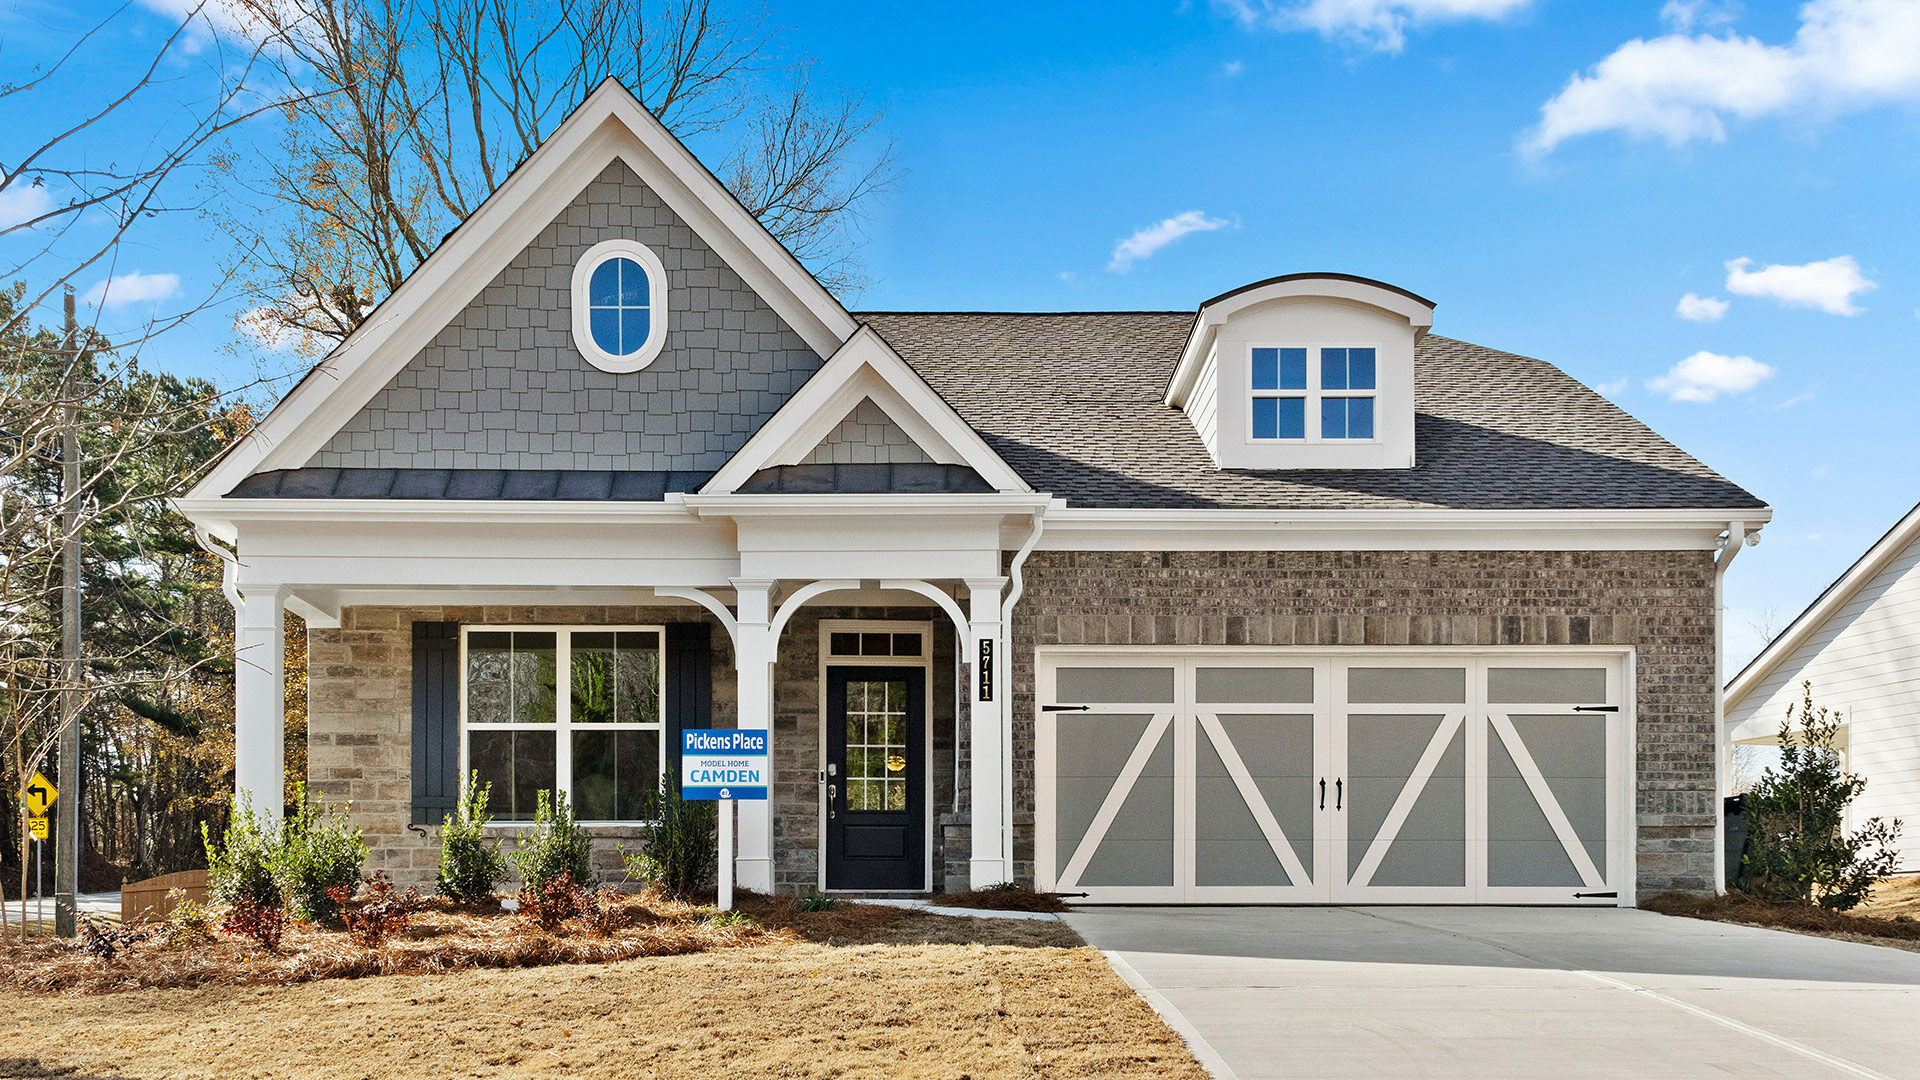 Lennar Pickens Place exterior